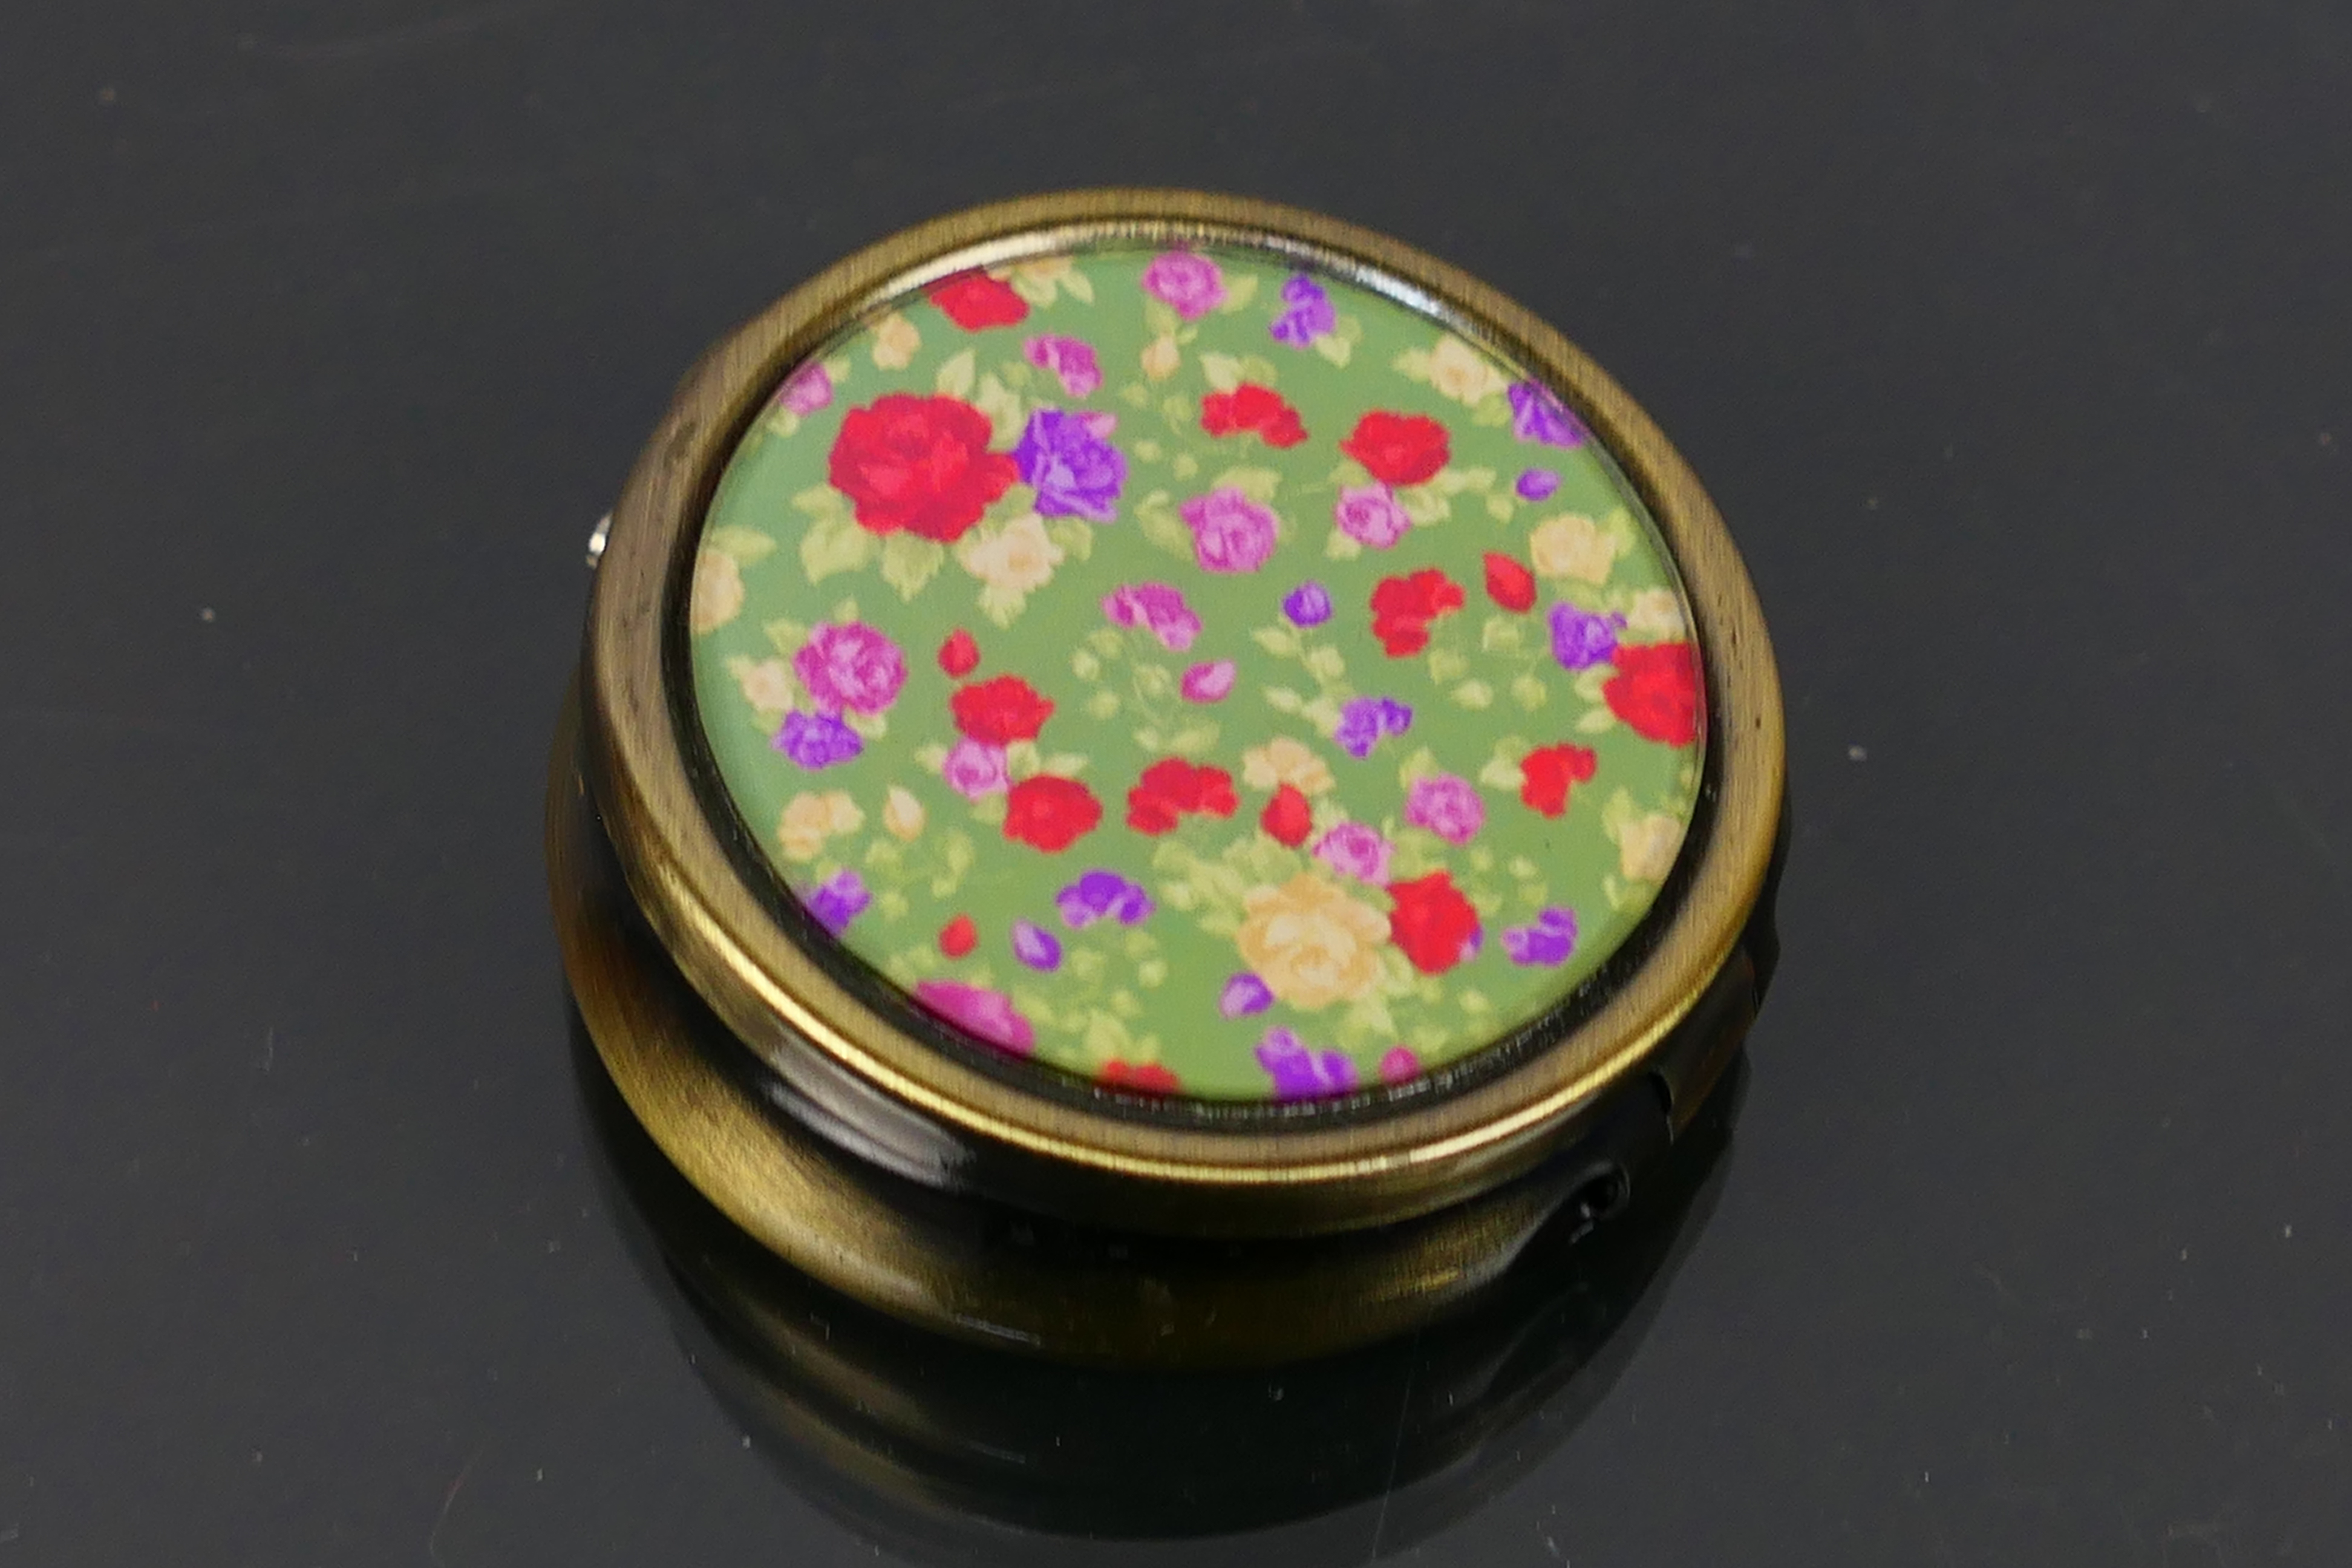 3 x vintage style compacts including a round double mirror compact with a dragonfly on a teal - Image 7 of 8